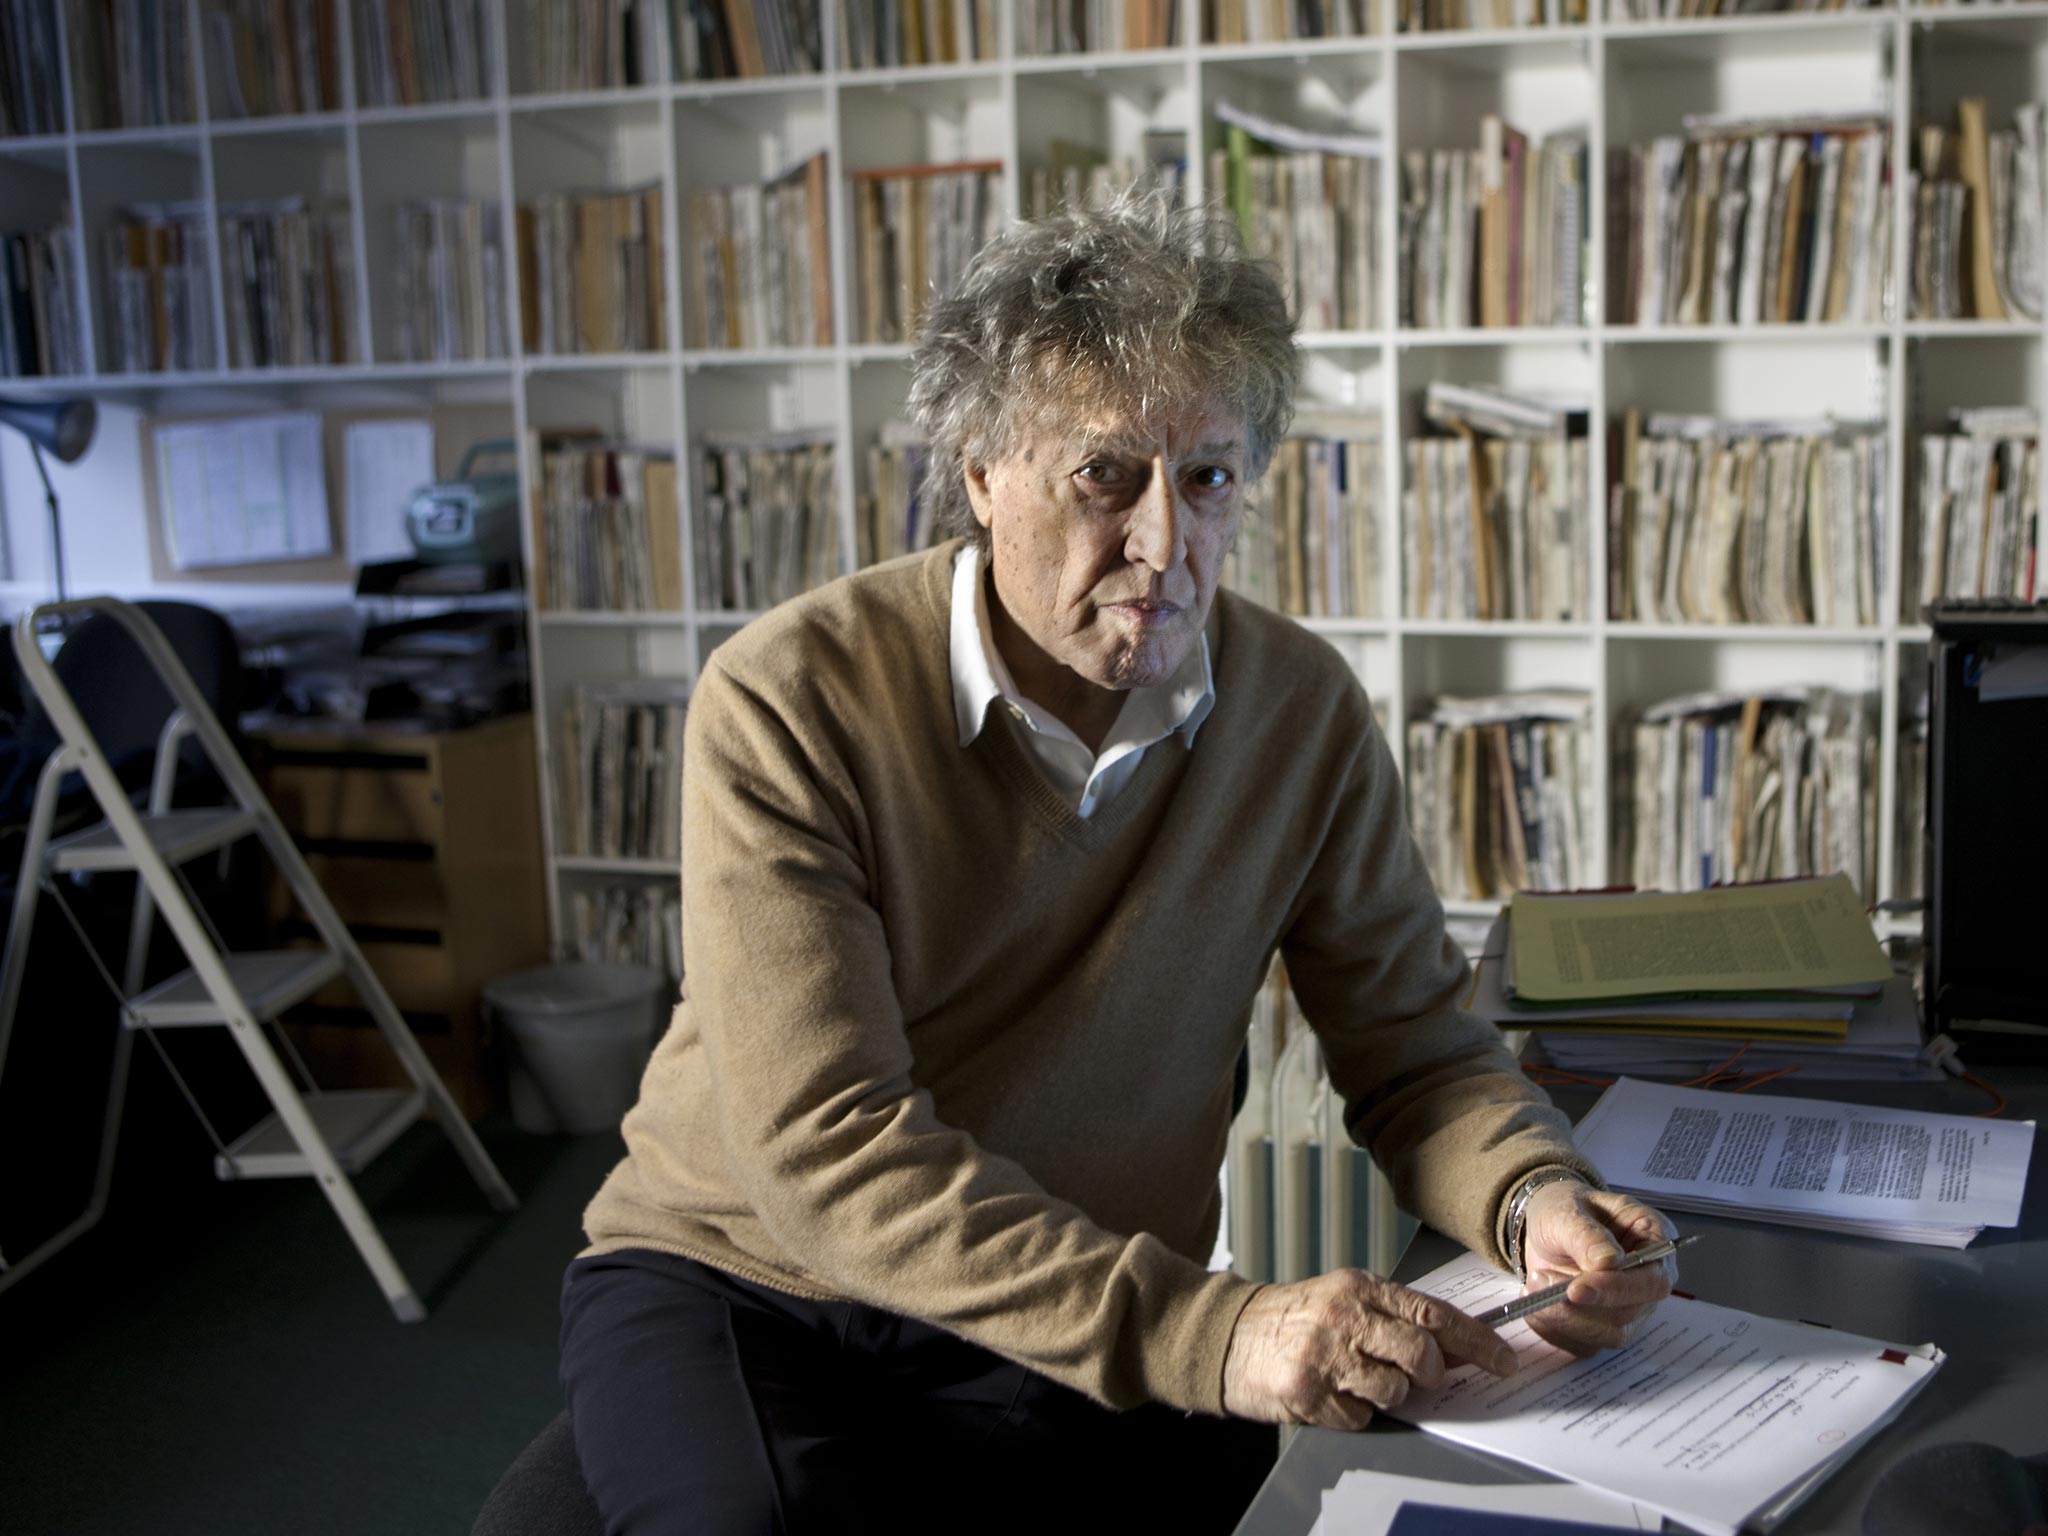 Playwright Tom Stoppard will receive a special award for artistic achievement and defense of creative expression